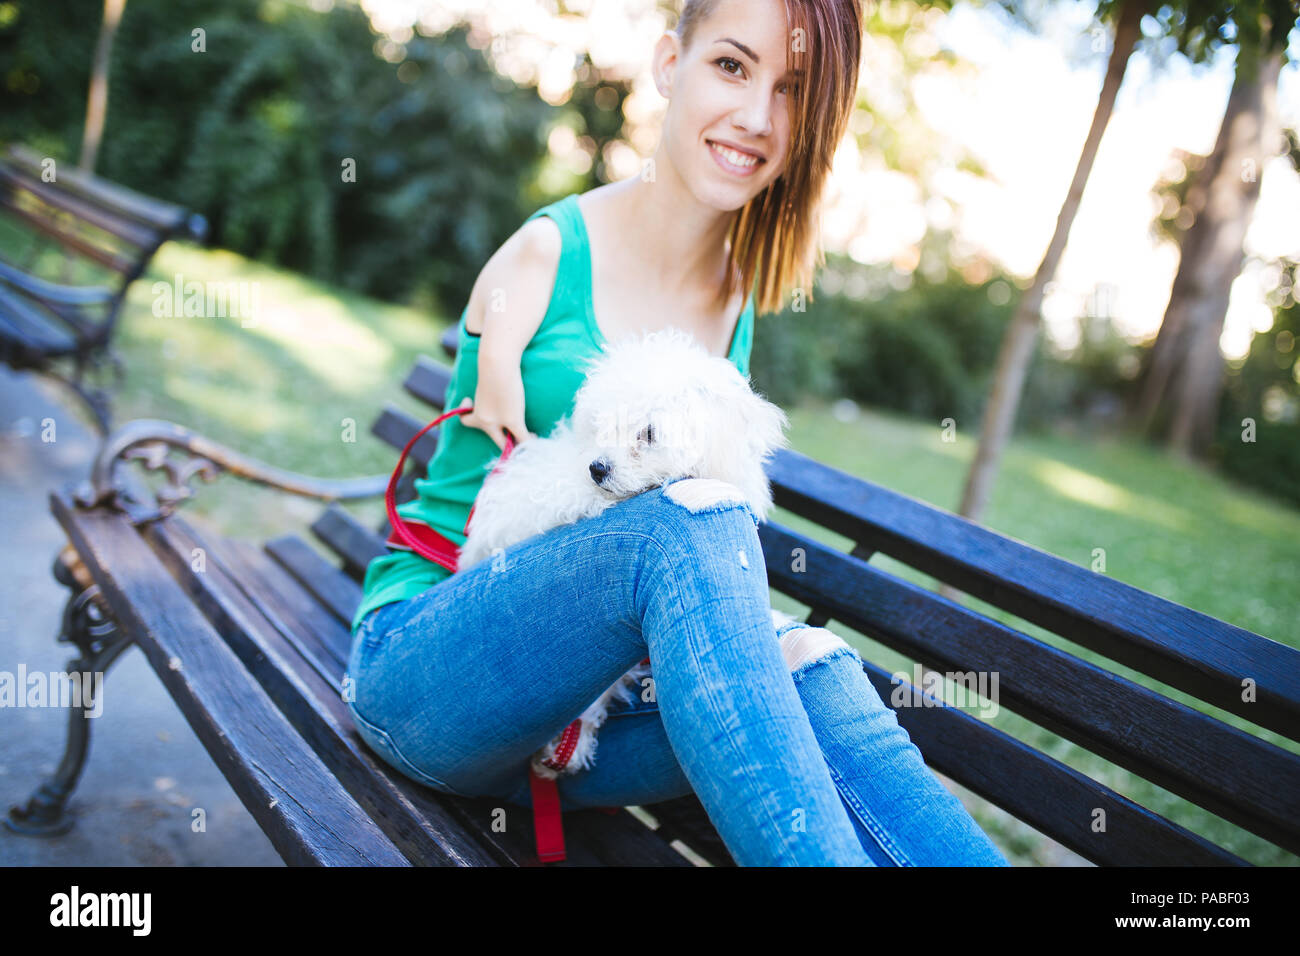 Portrait of beautiful smiling invalid young woman born without upper extremities holding her white little puppy and sitting on bench in park. Stock Photo